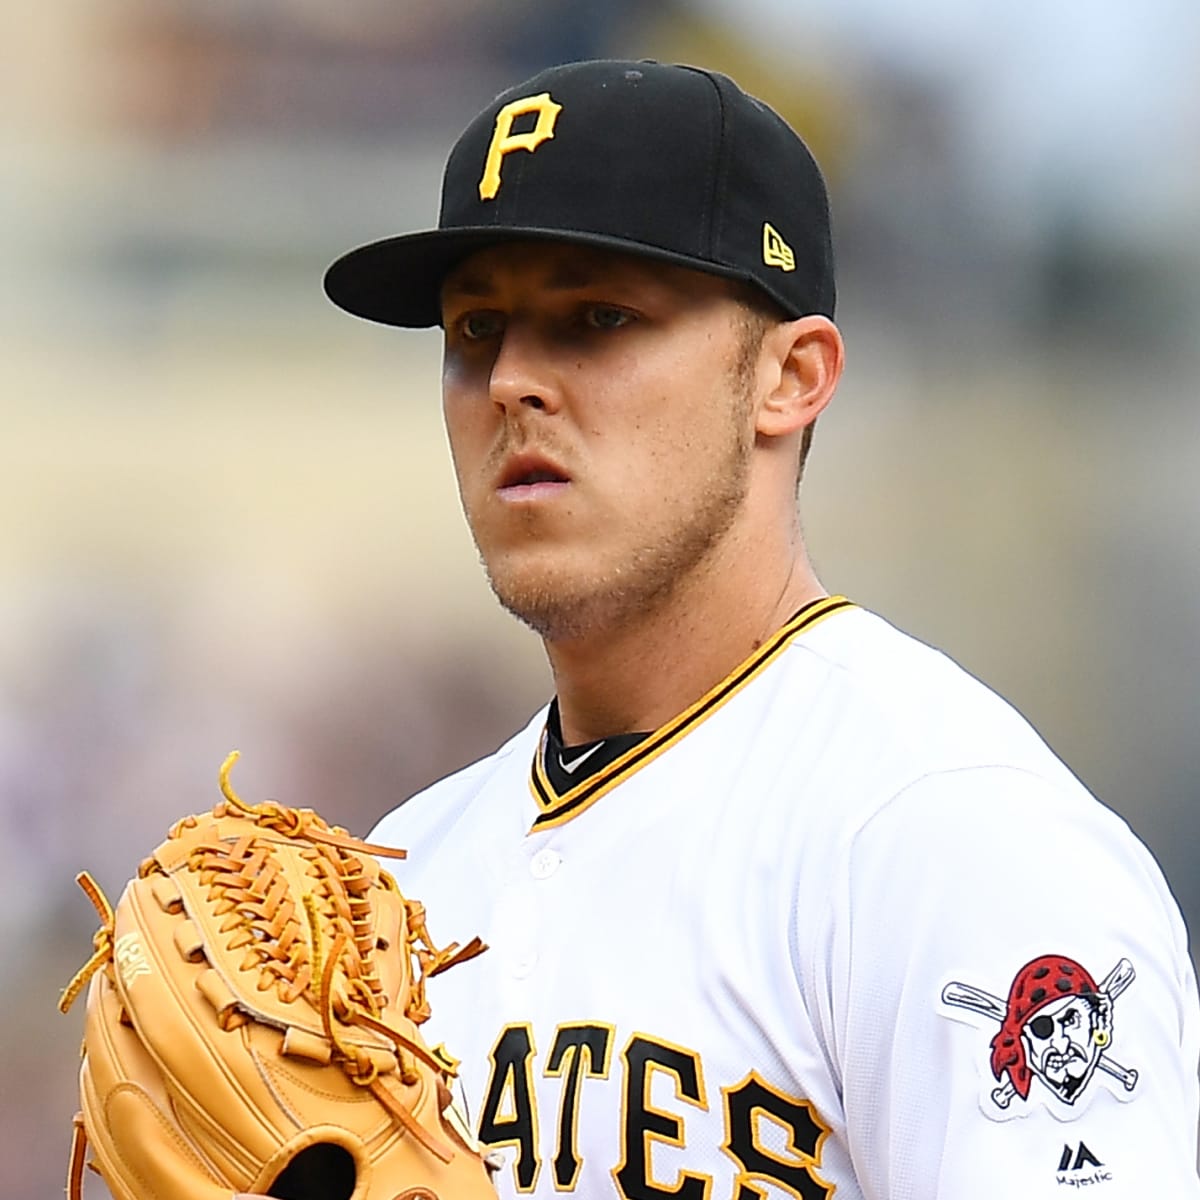 Pirates pitcher Jameson Taillon 'different person' after cancer surgery